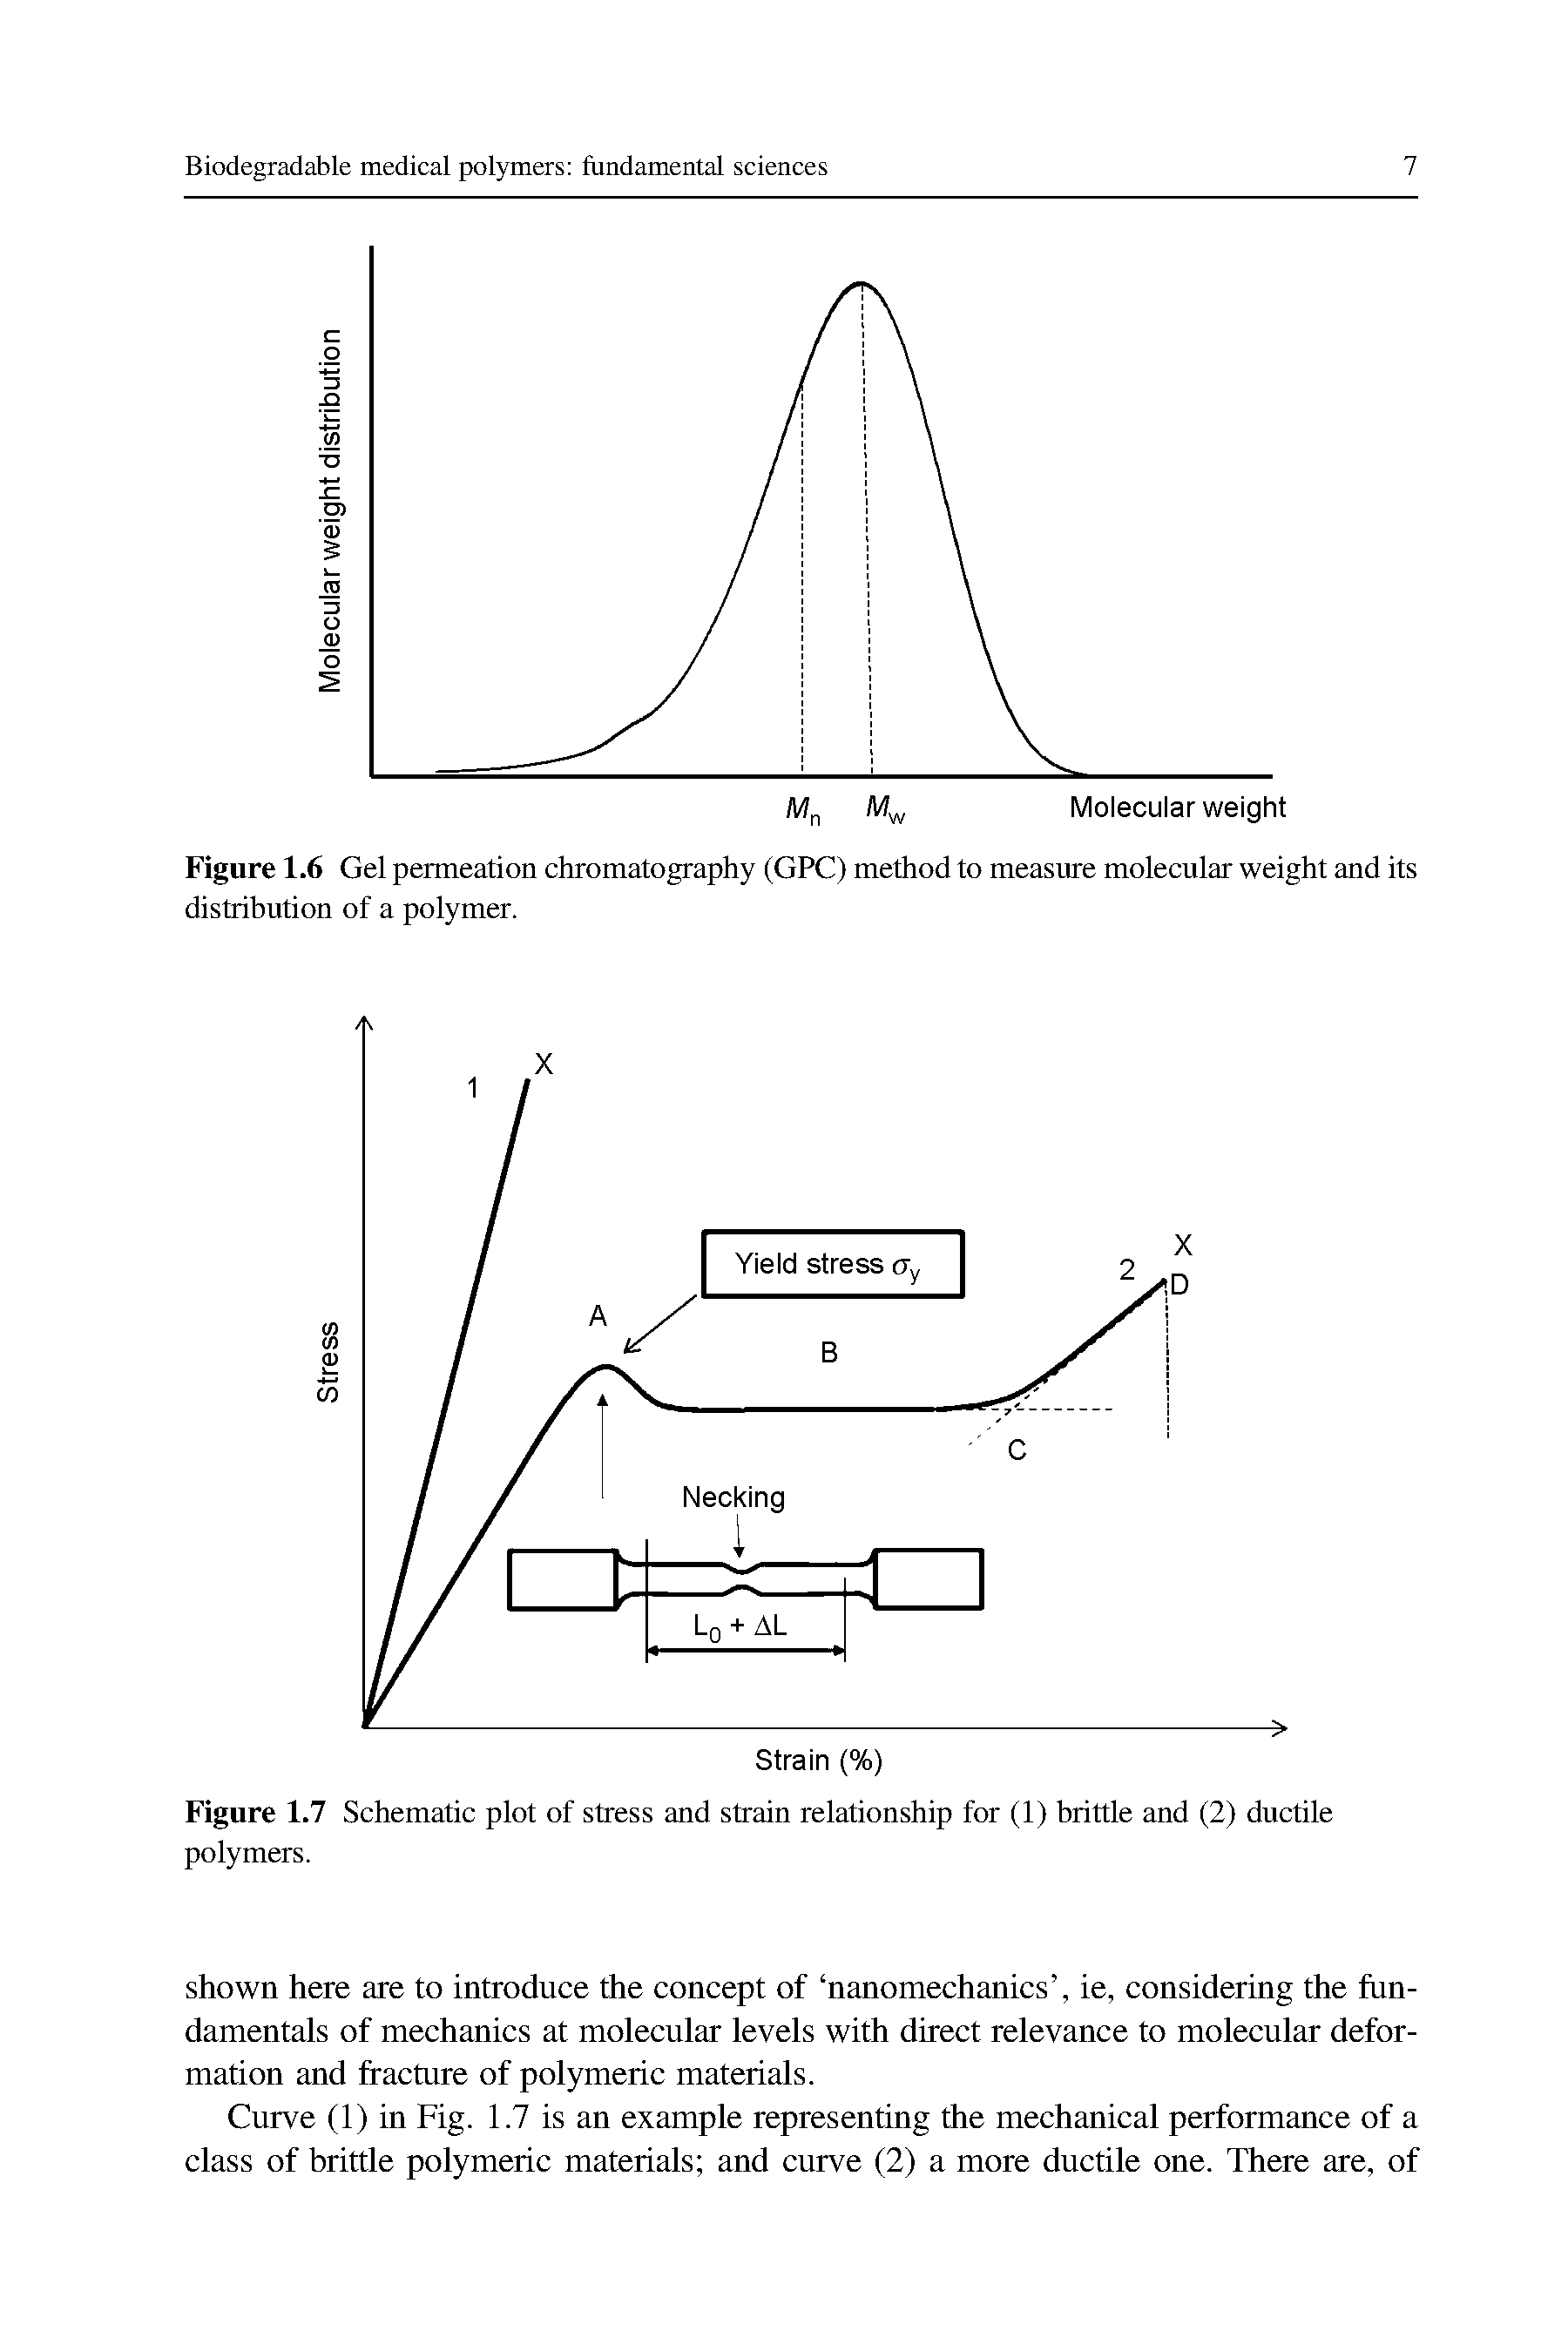 Figure 1.6 Gel permeation chromatography (GPC) method to measure molecular weight and its distribution of a polymer.